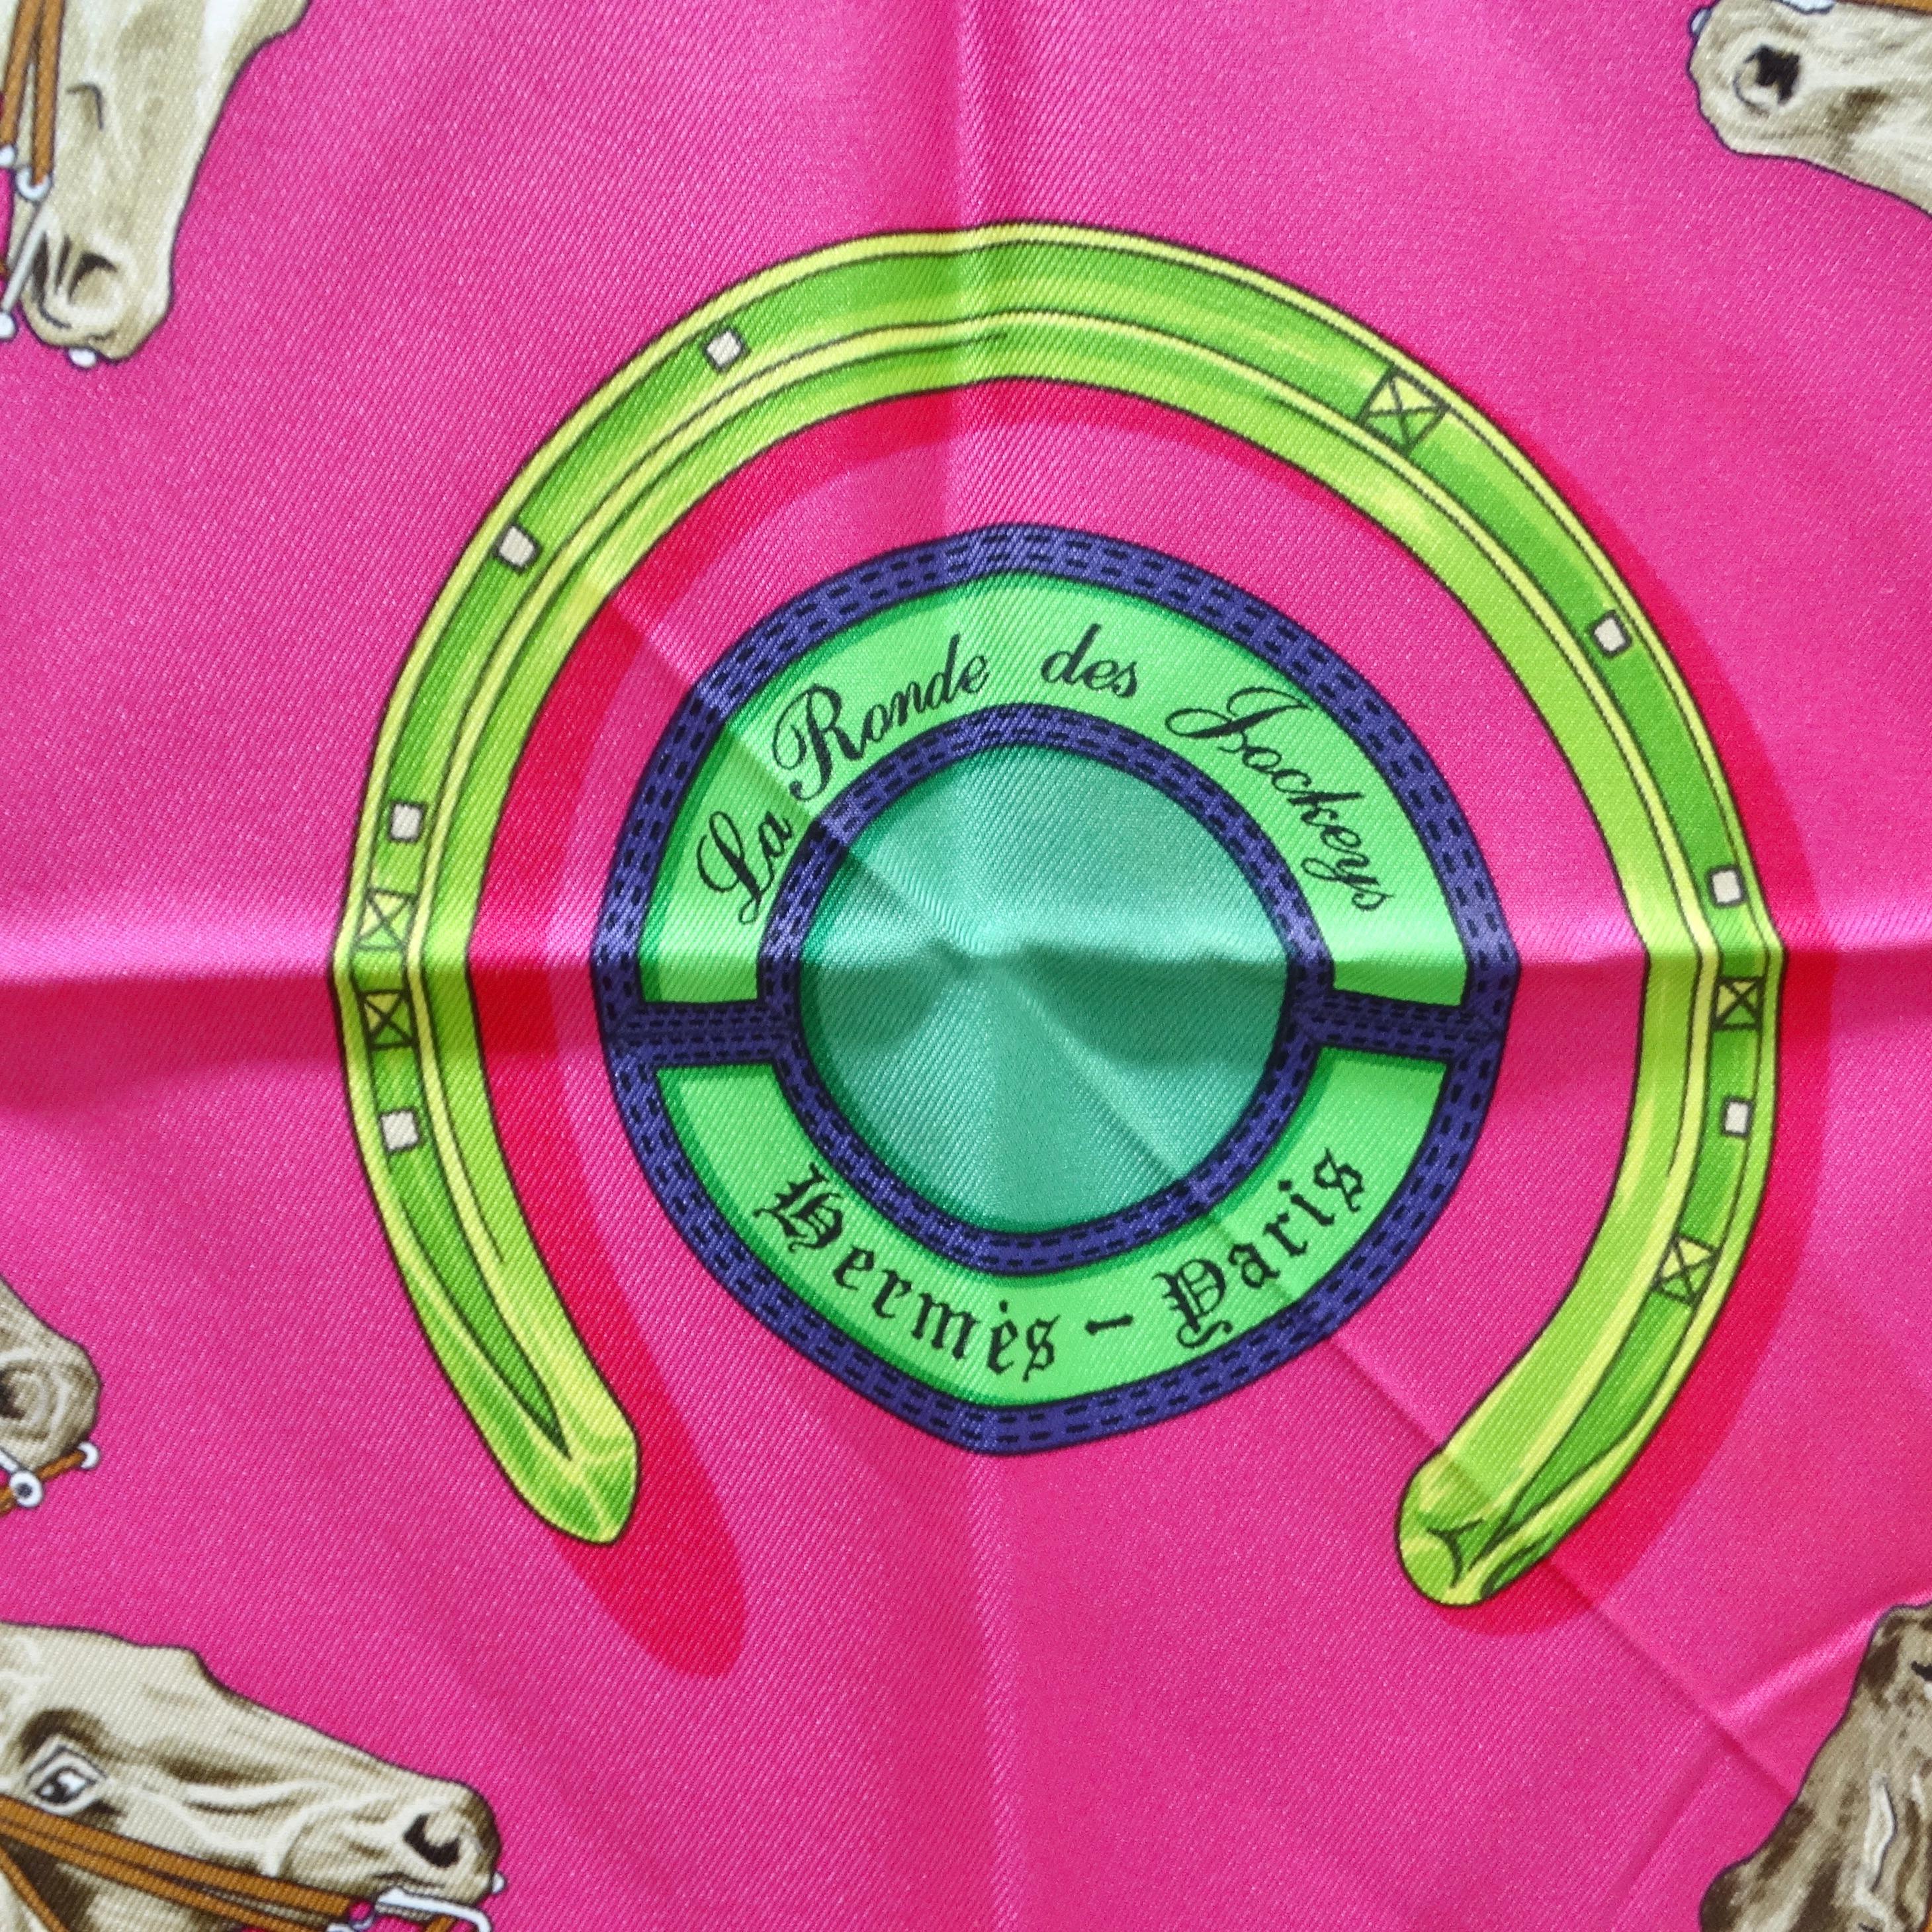 Do not miss out on the Hermès La Ronde Des Jockeys Silk Scarf, a wearable work of art that brings vibrant energy and elegance to your ensemble. This hot pink silk scarf, adorned with a vibrant green border, features an intricate print depicting men